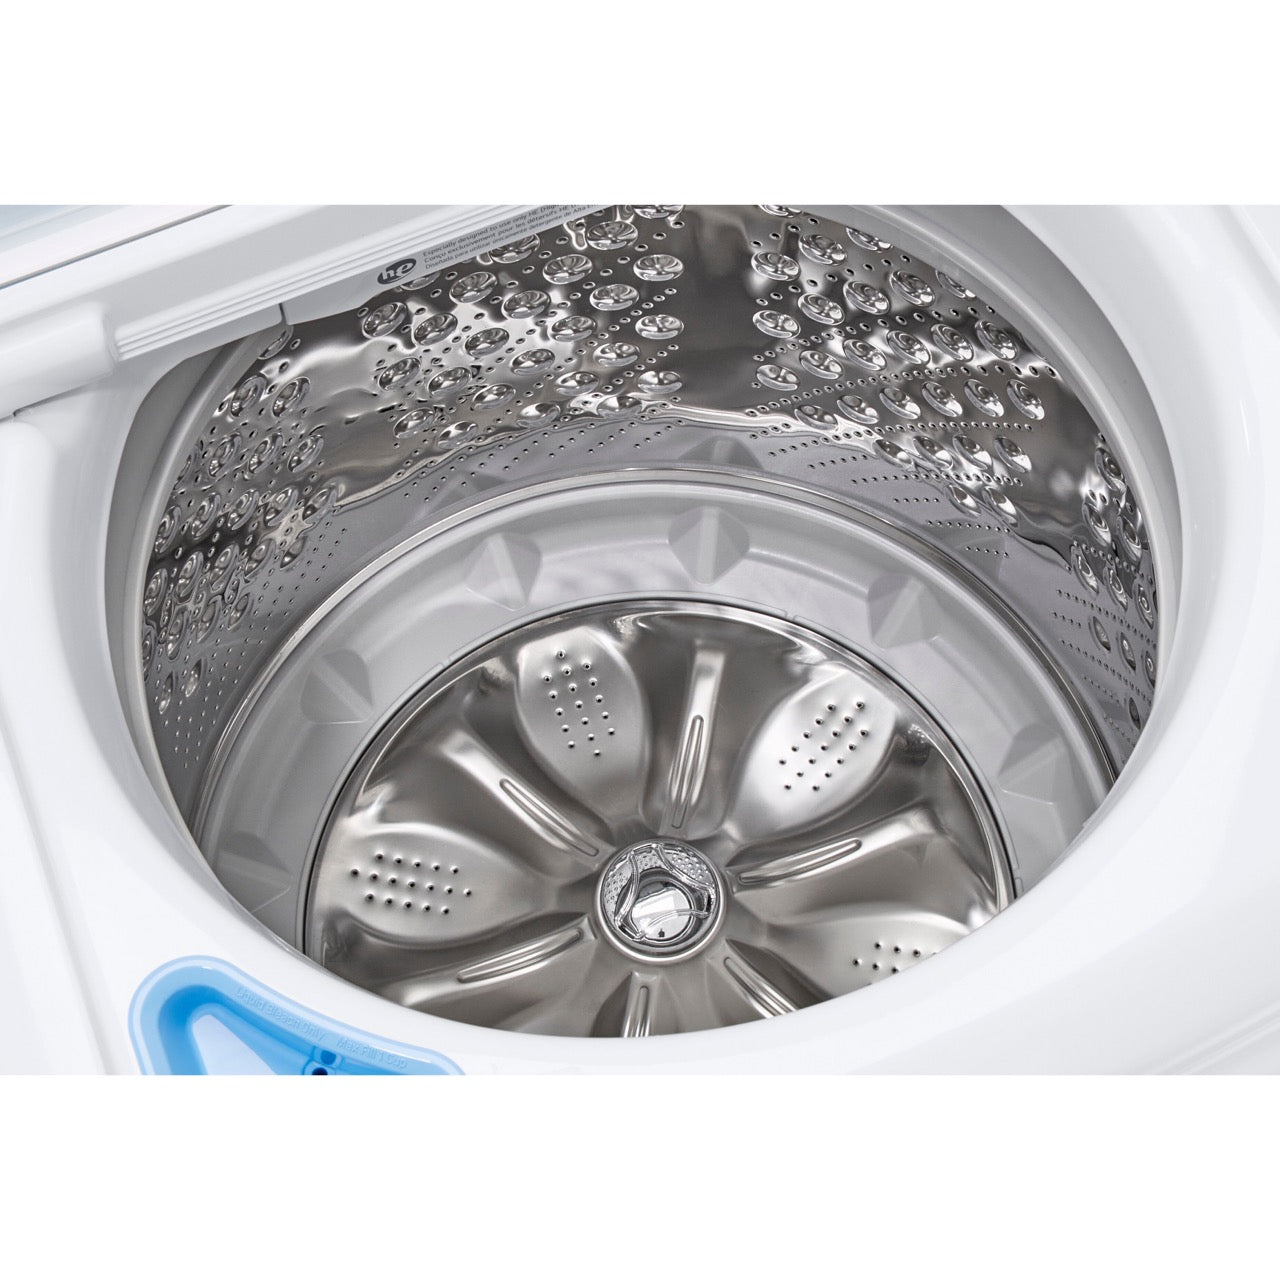 LG Electronics 5.0-Cu. Ft. Mega Capacity Top Load Washer with TurboDrum Technology (WT7150CW)